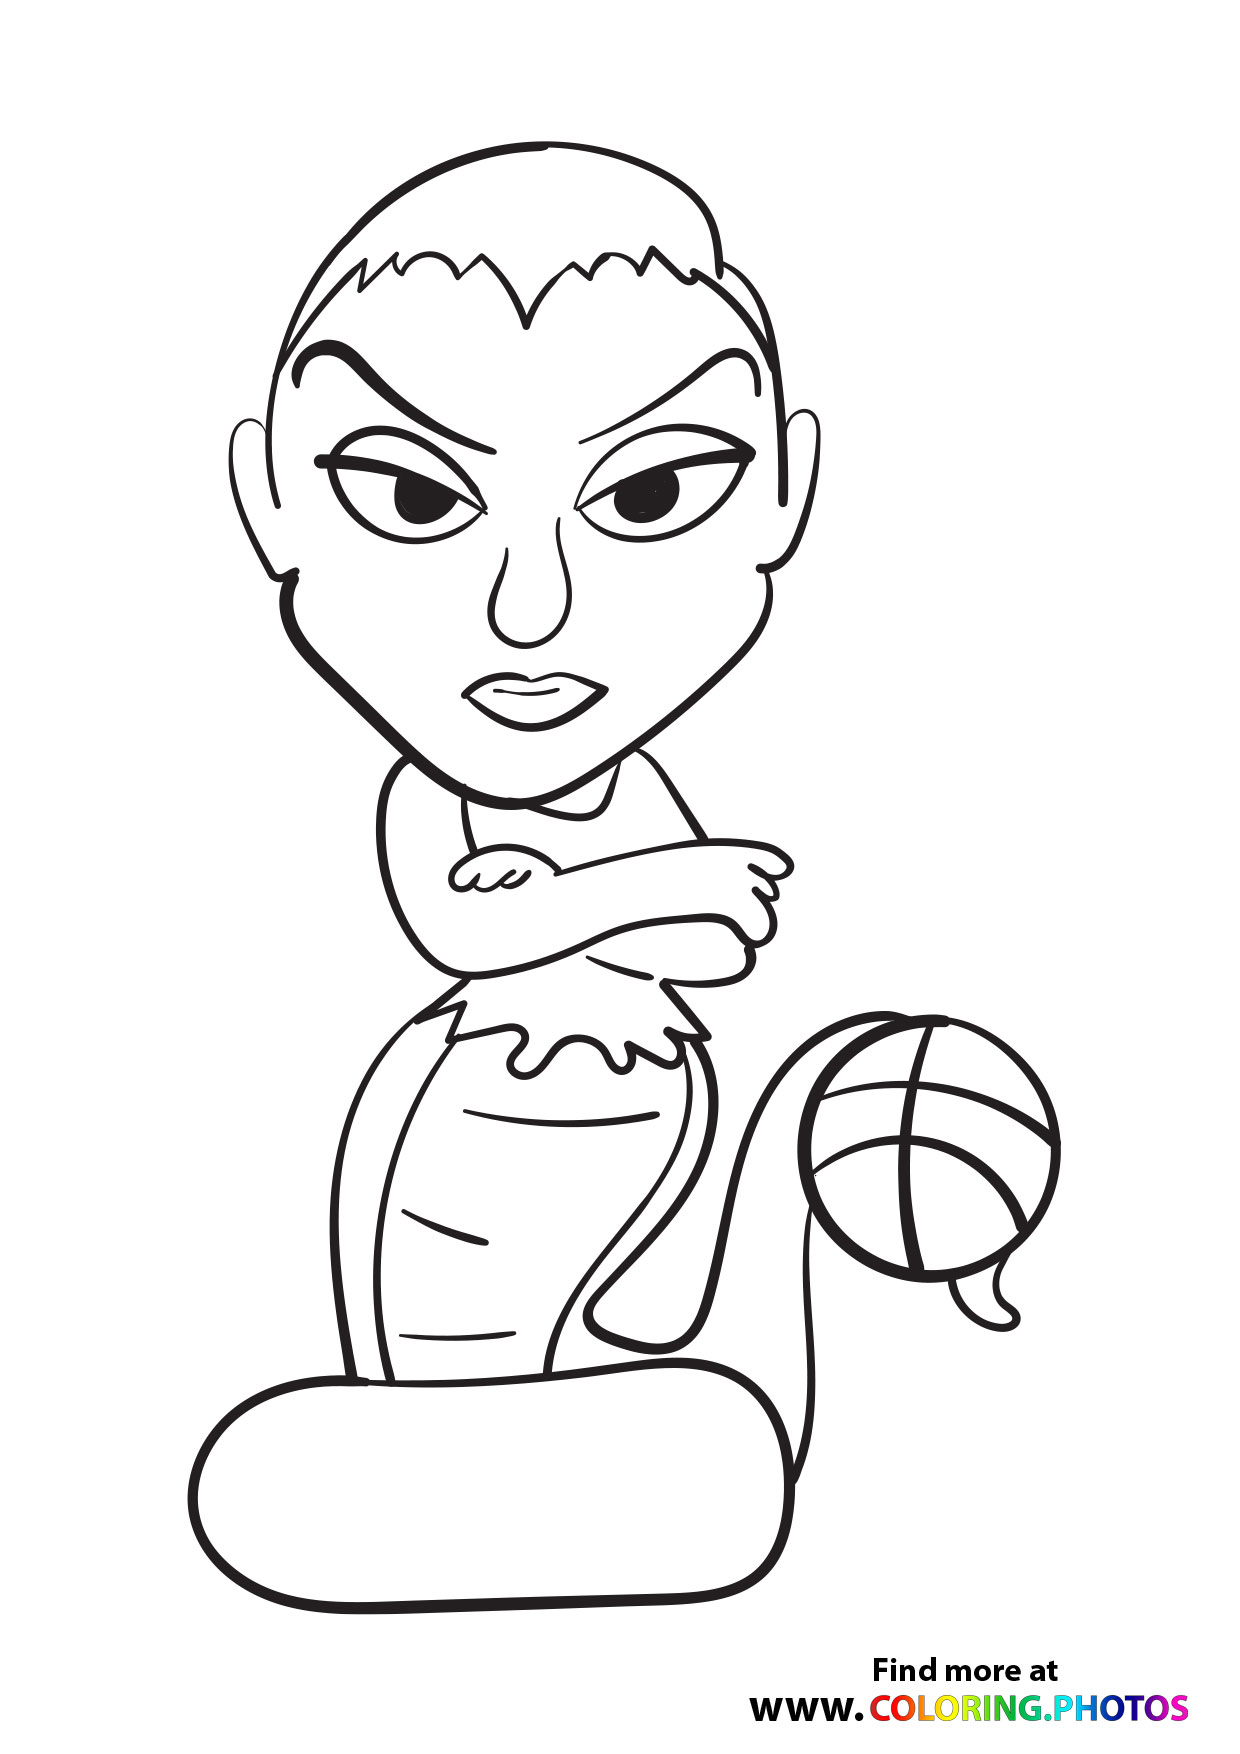 White Mamba Goon Squad - Space Jam: A new legacy - Coloring Pages for kids